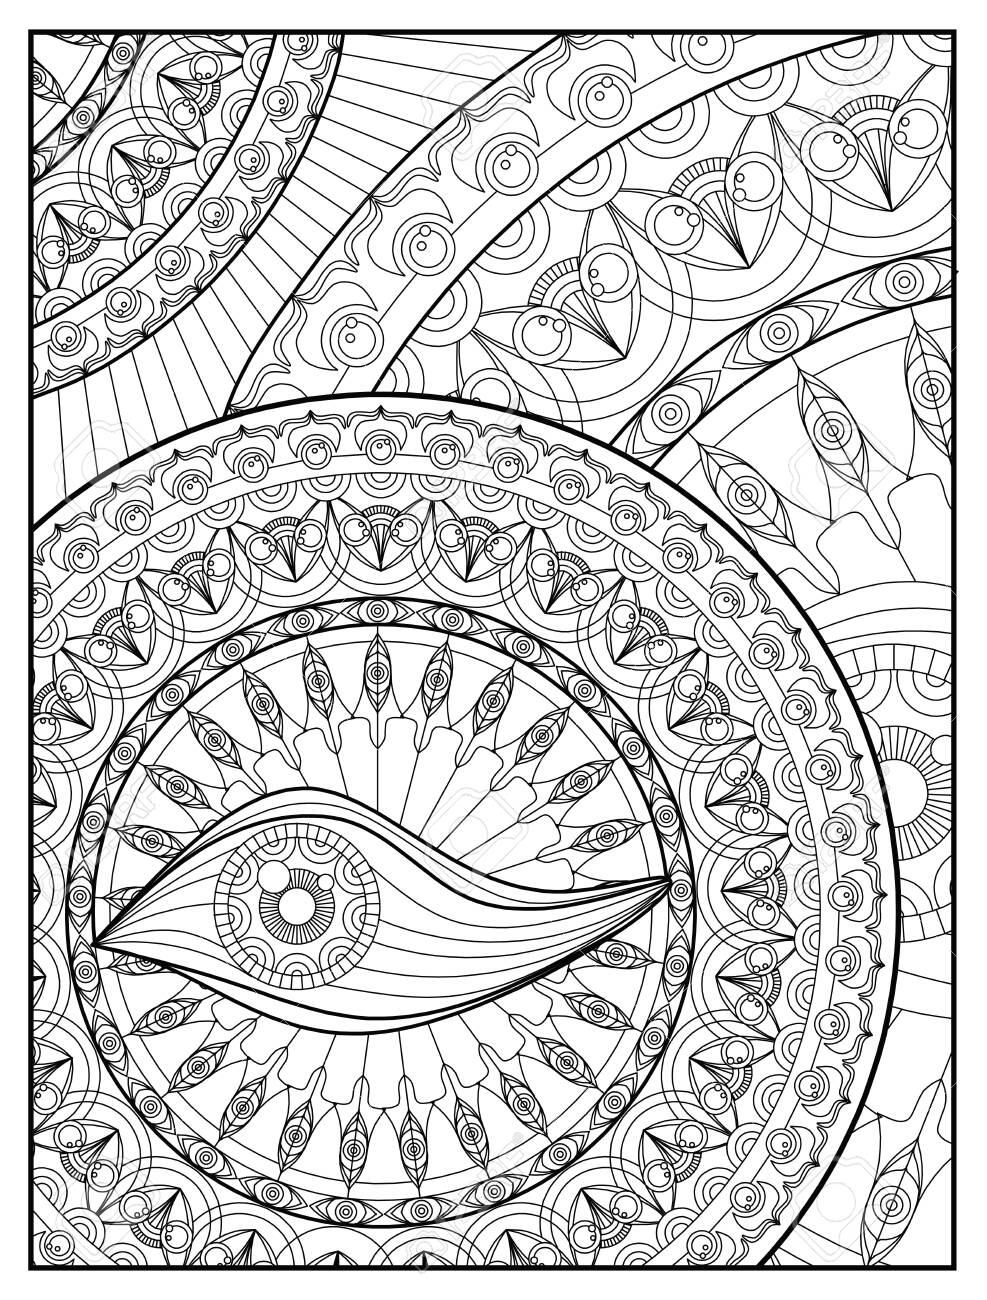 Coloring Pages : Mandala Coloring Page For Adult Relaxation Design ...